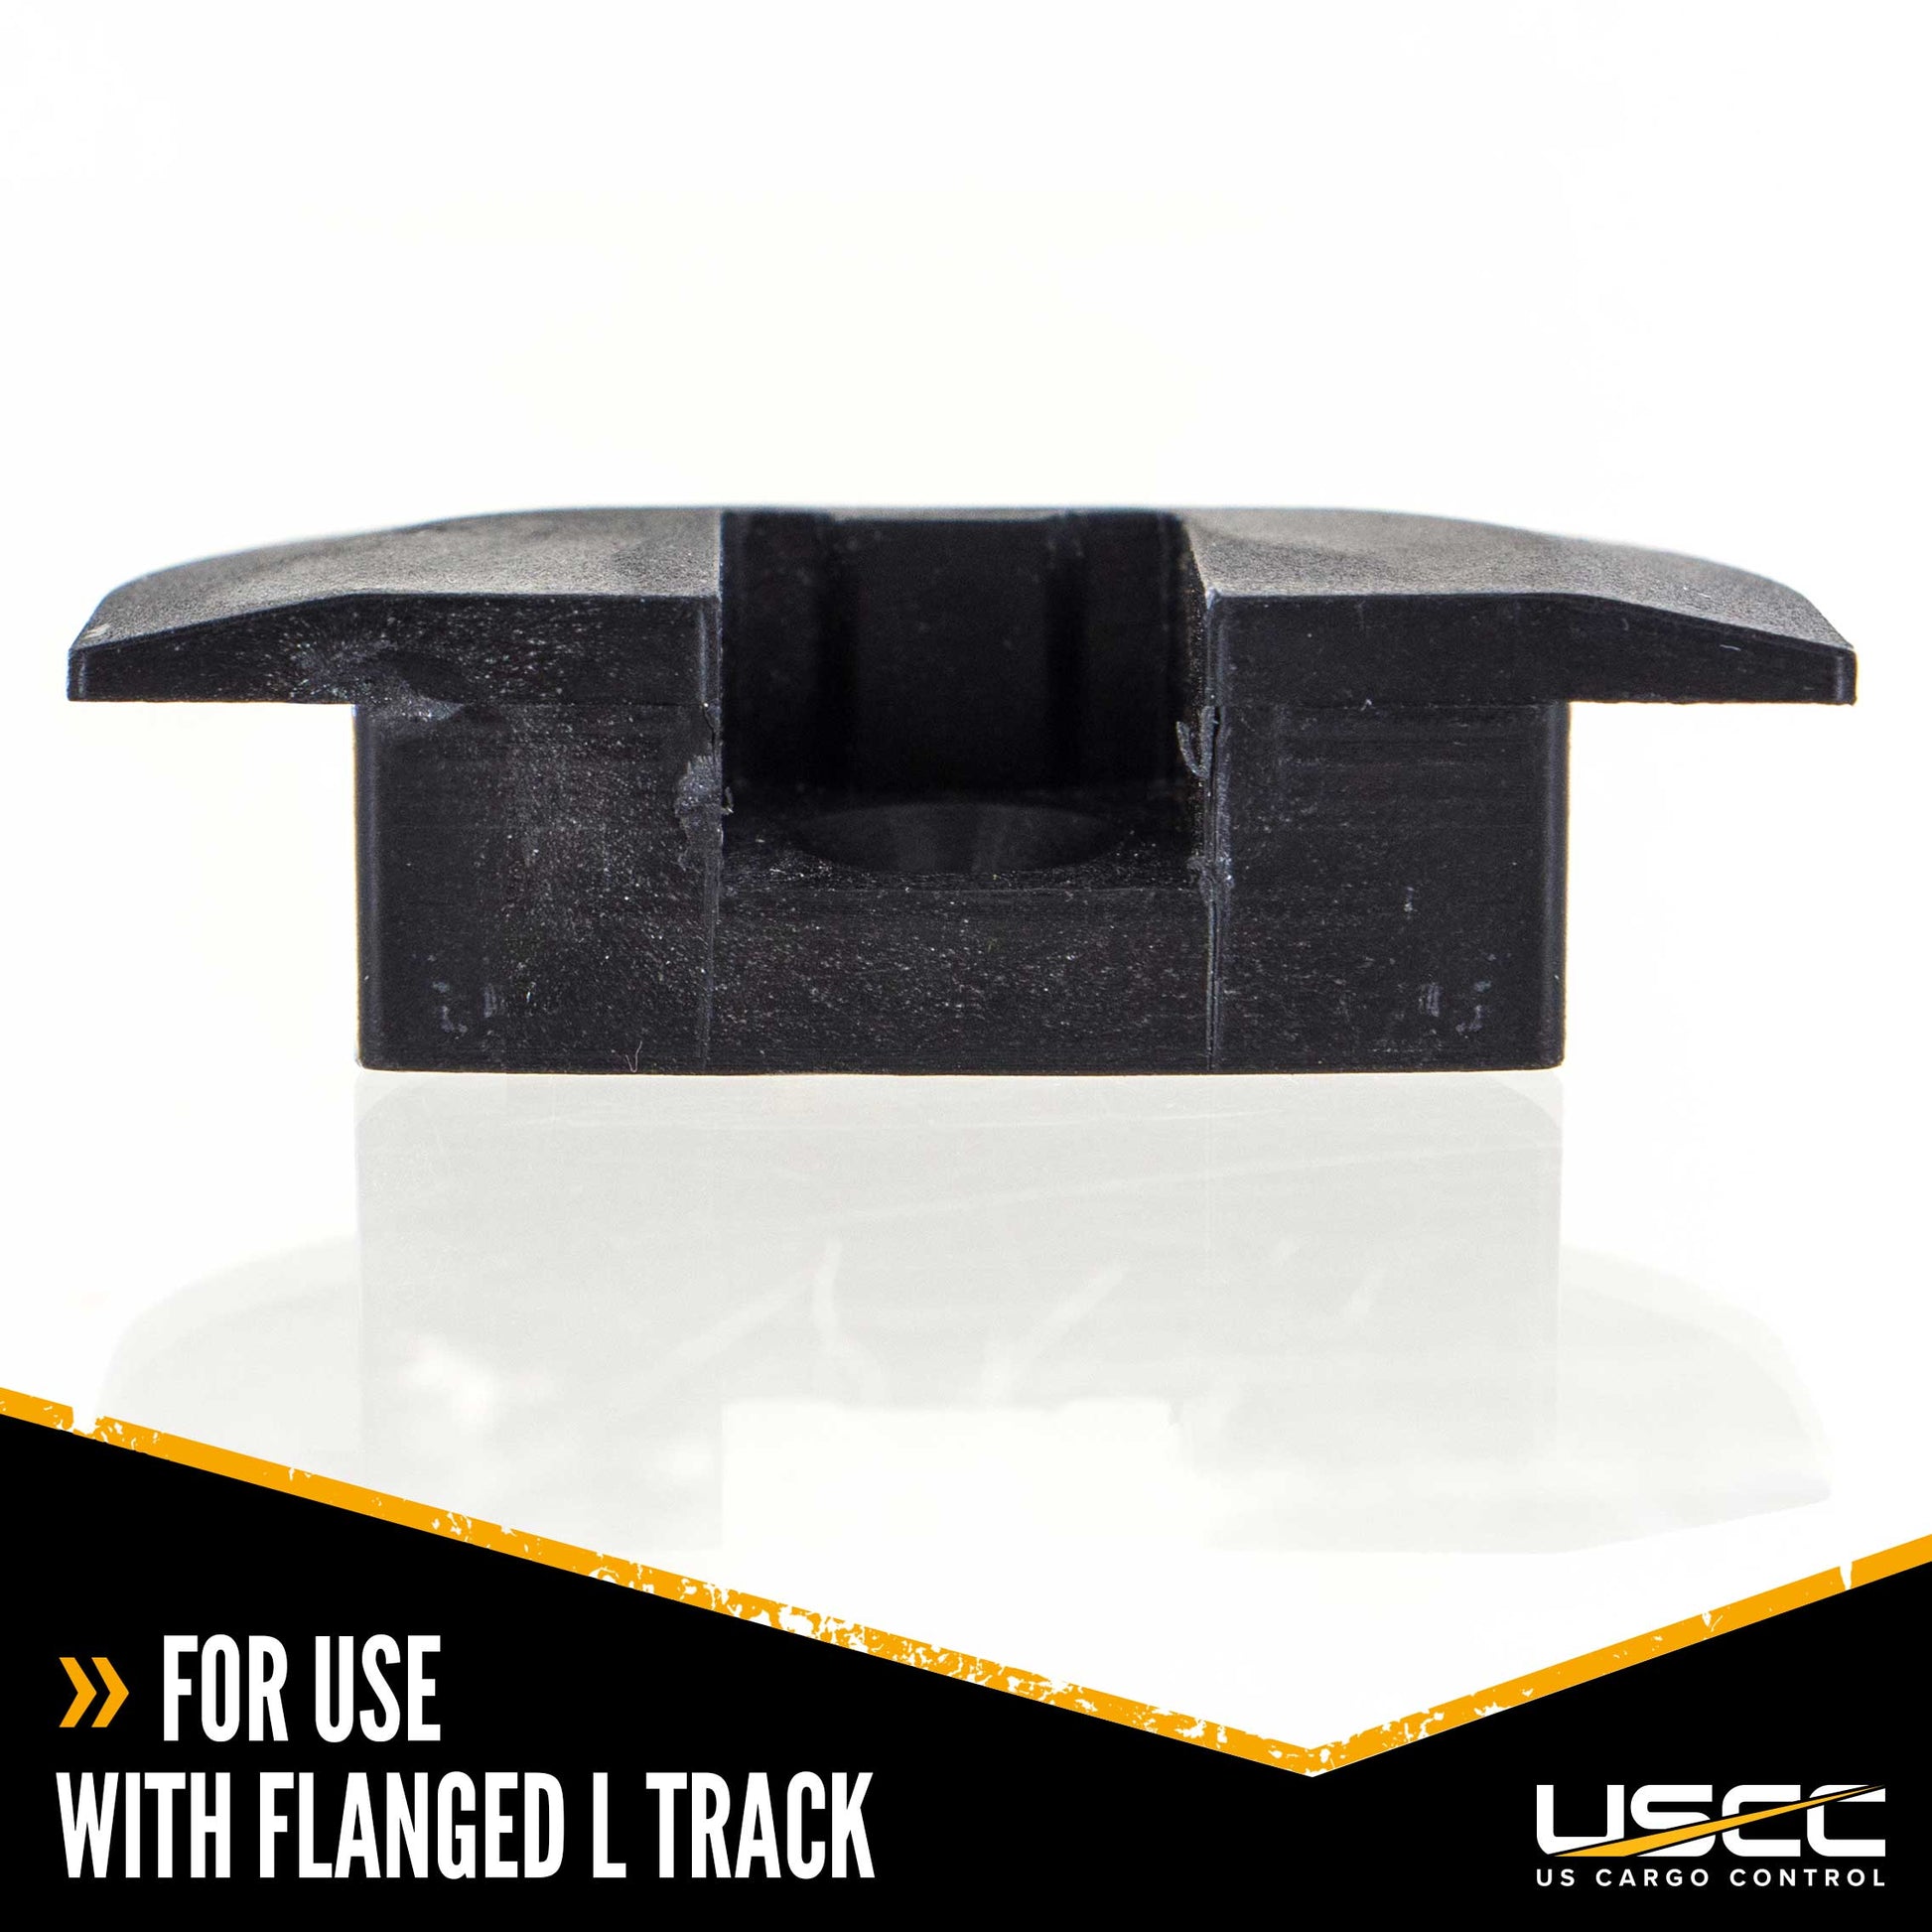 Flanged End Cap for AirlineStyle LTrack image 3 of 7